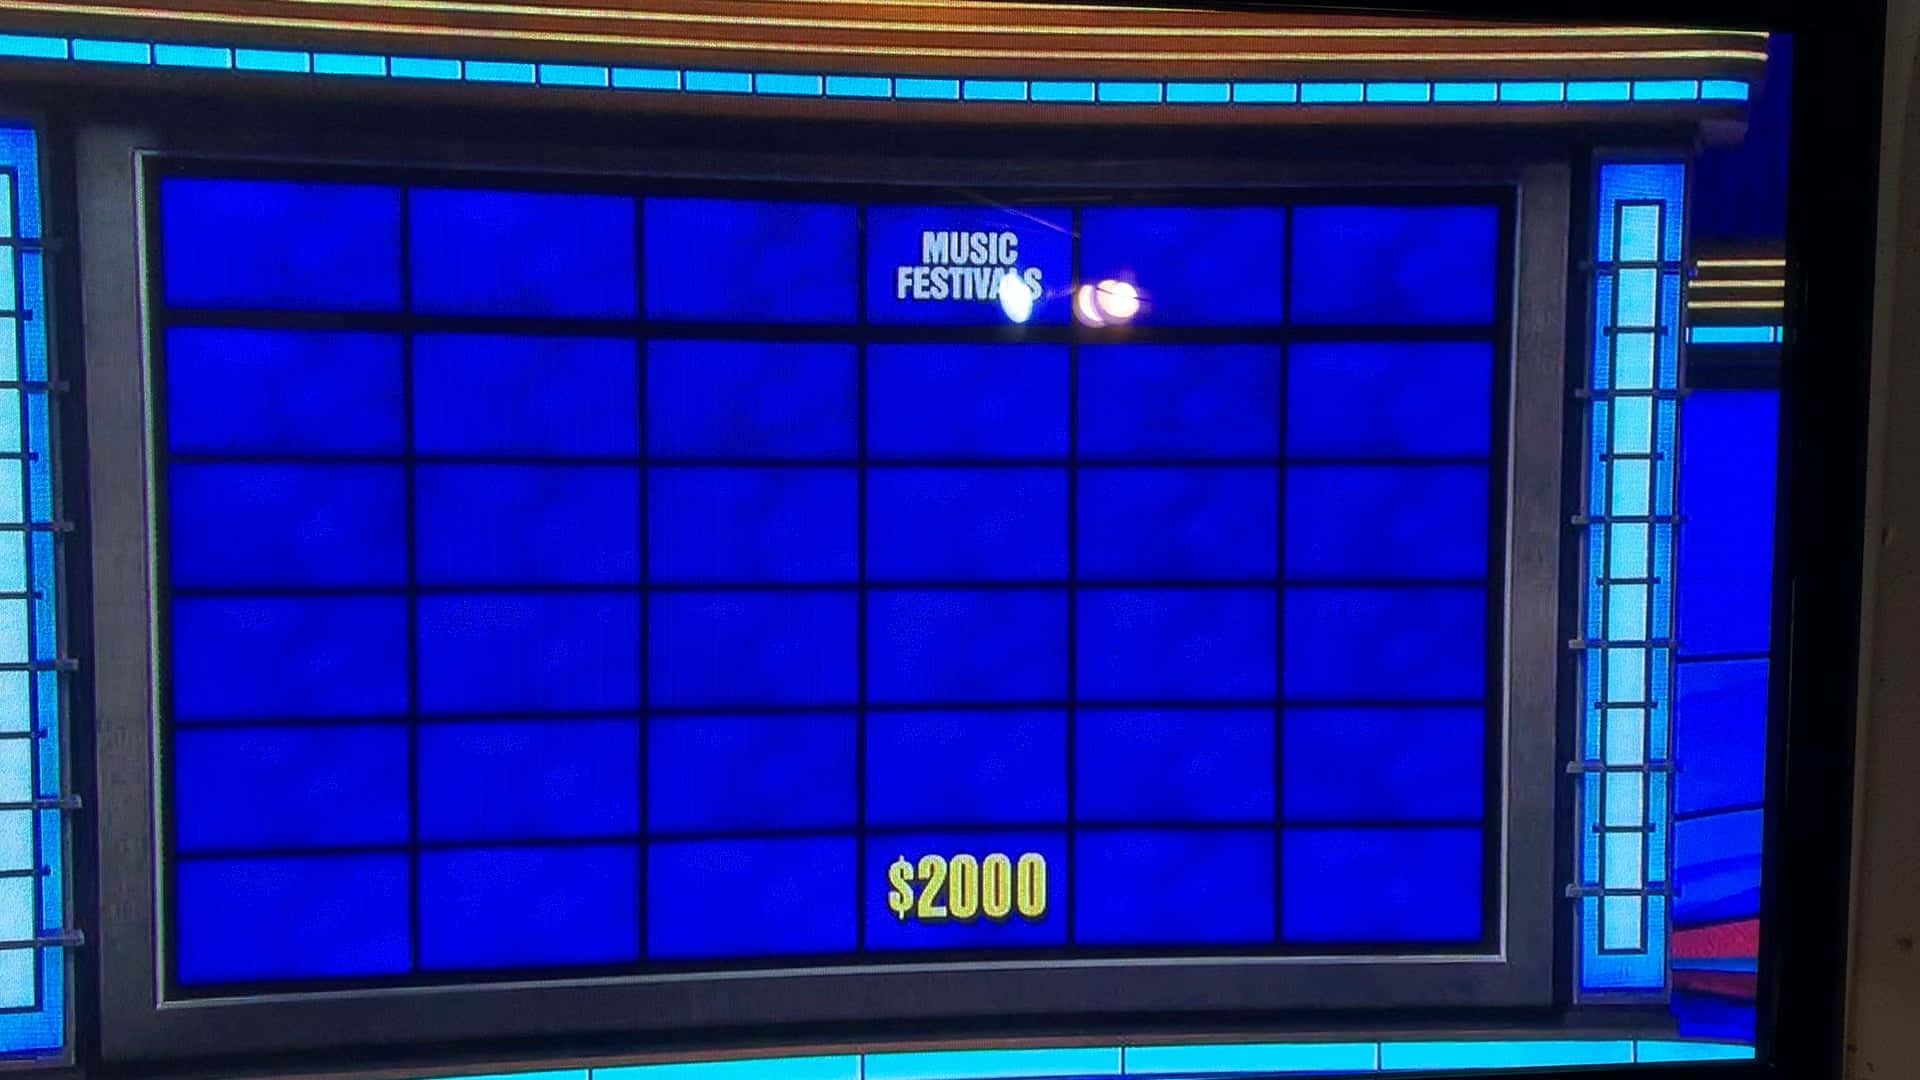 Jeopardy, the classic game show featuring contestants answering trivia questions